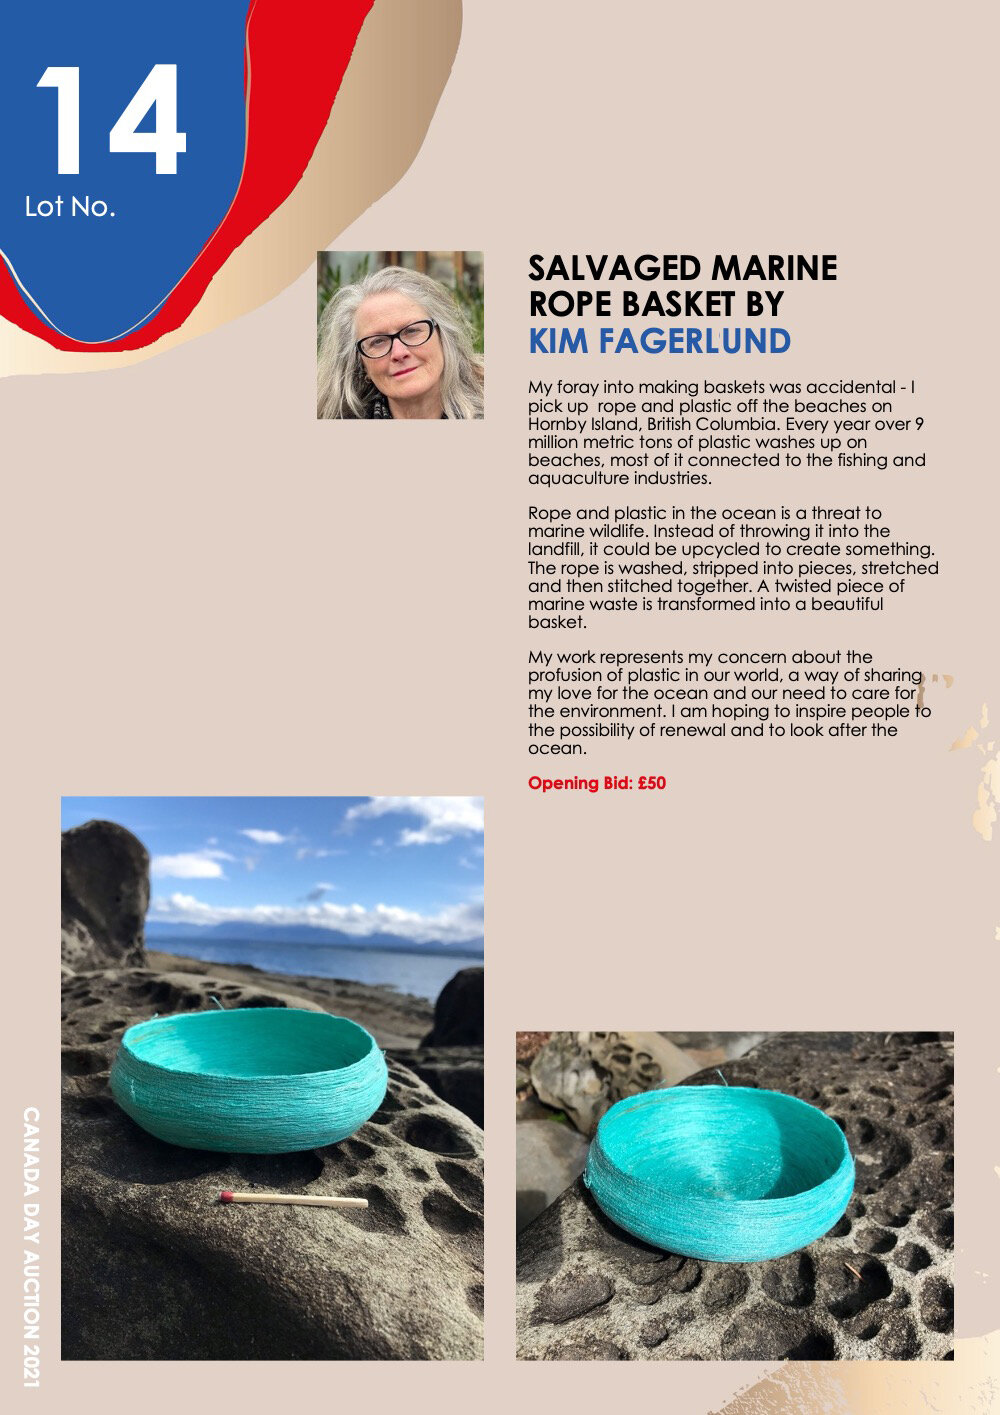   Lot 14: SALVAGED MARINE ROPE BASKET BY KIM FAGERLUND    My foray into making baskets was accidental - I pick up rope and plastic off the beaches on Hornby Island, British Columbia. Every year over 9 million metric tons of plastic washes up on beach